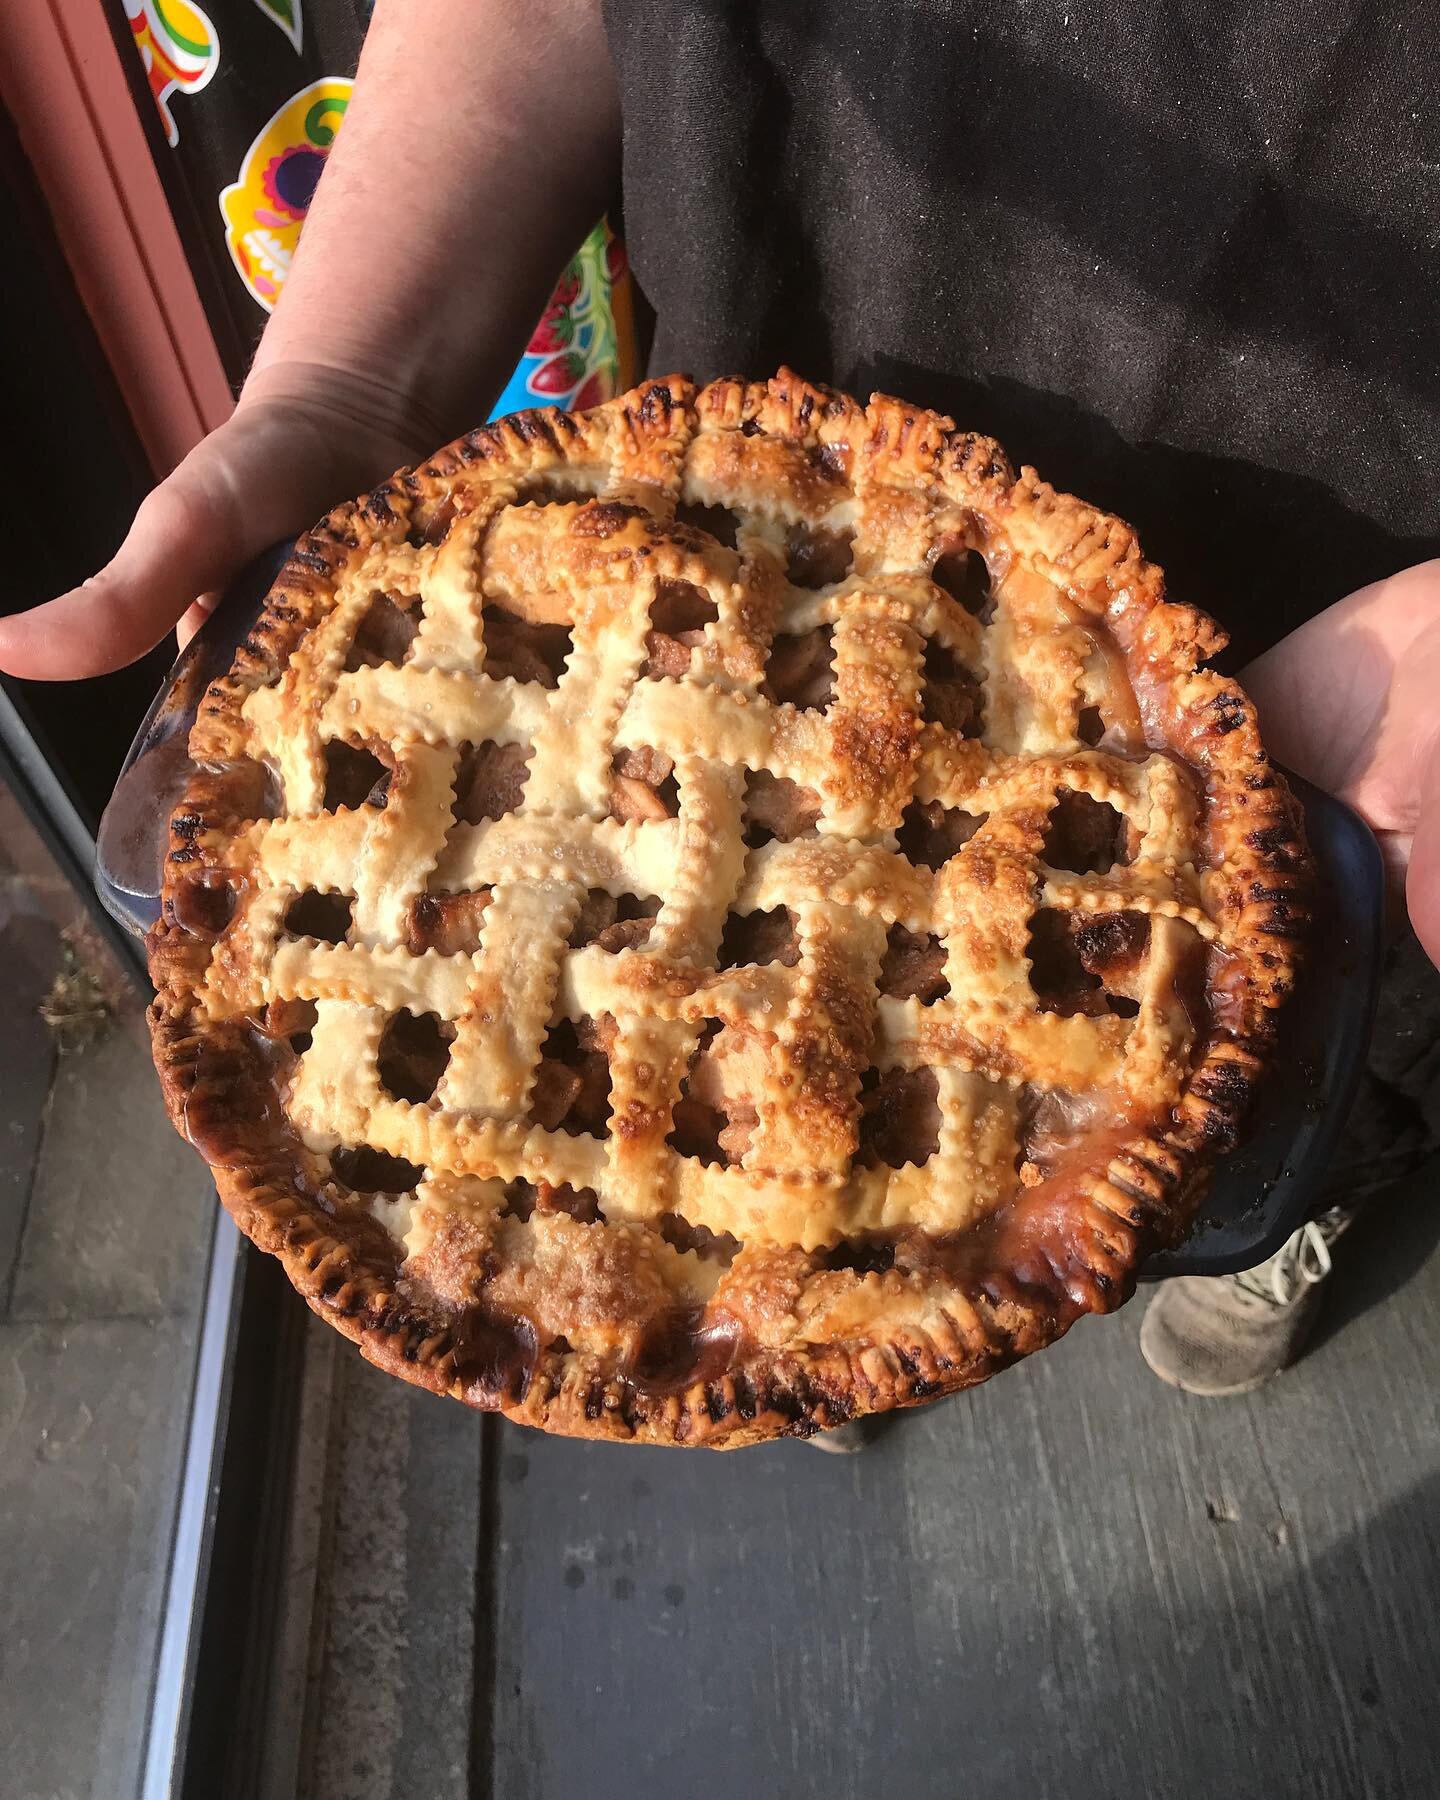 Happy &pi; Day! We love Pi because it allows us to calculate the volume of our pies! This lovely apple pie is approximately 127.235 cubic inches or 323.176 cubic centimeters. We can also translate that into many bites of deliciousness! Come in for a 